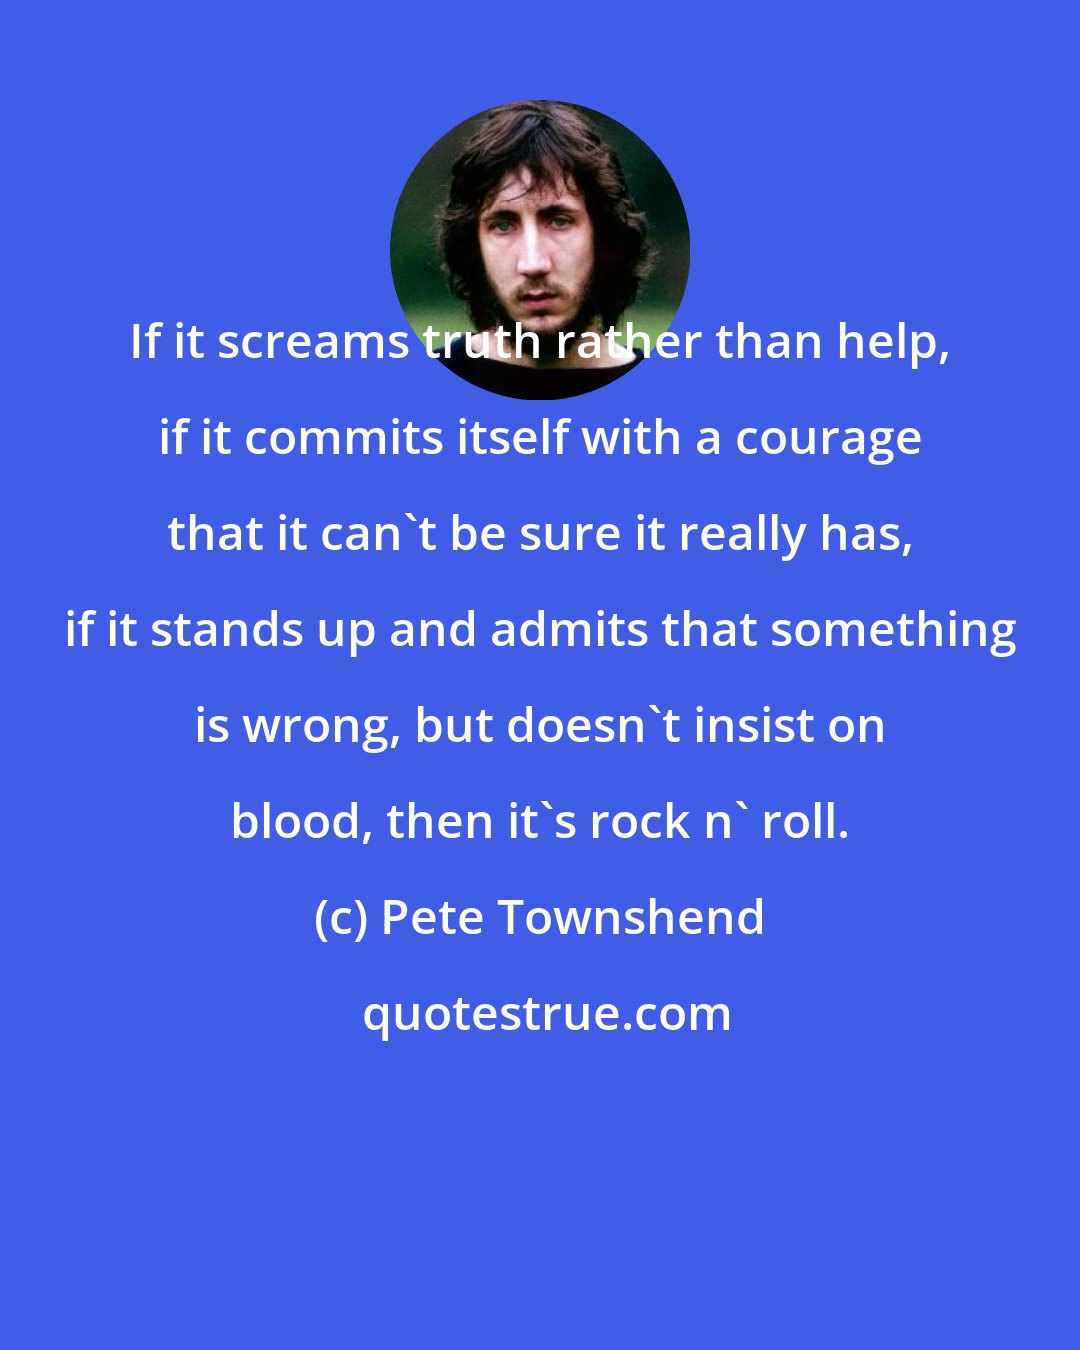 Pete Townshend: If it screams truth rather than help, if it commits itself with a courage that it can't be sure it really has, if it stands up and admits that something is wrong, but doesn't insist on blood, then it's rock n' roll.